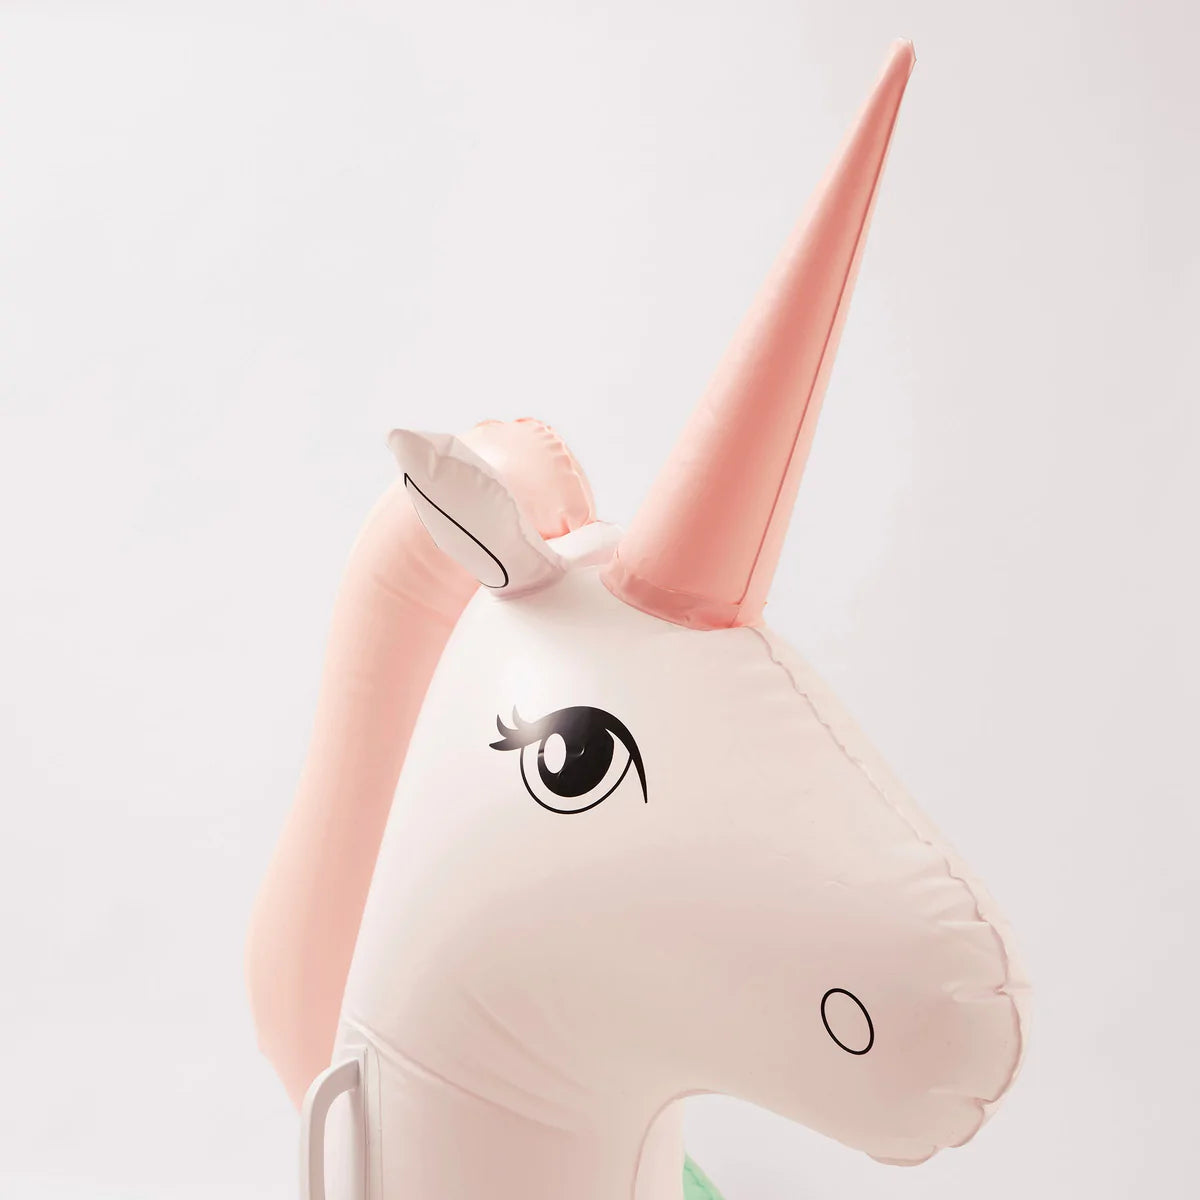 SunnyLife Luxe Ride-On Unicorn Float - Coral Ombre